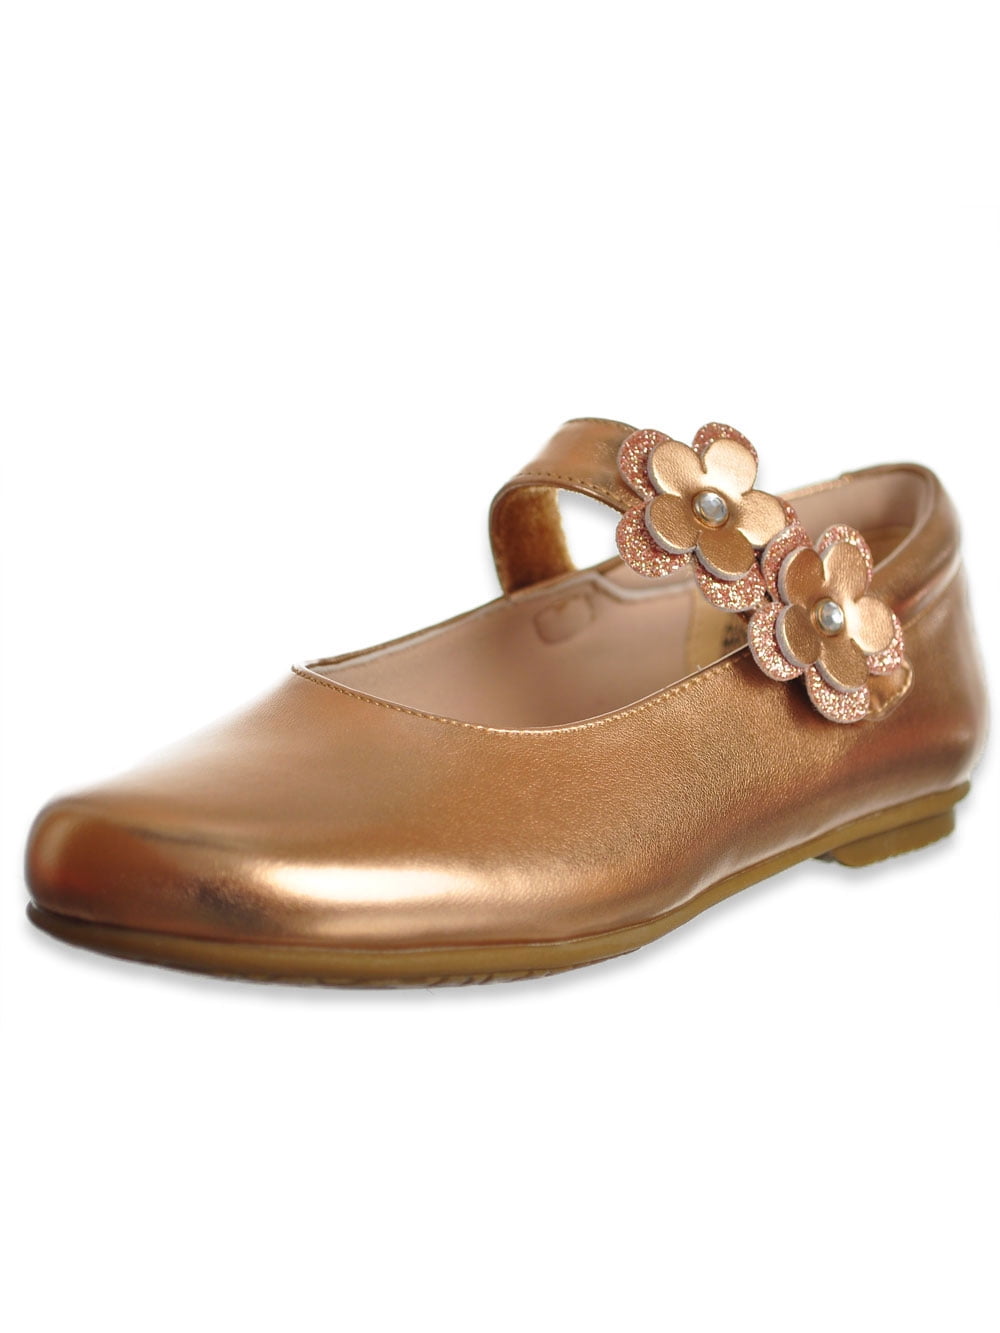 rose gold patent shoes